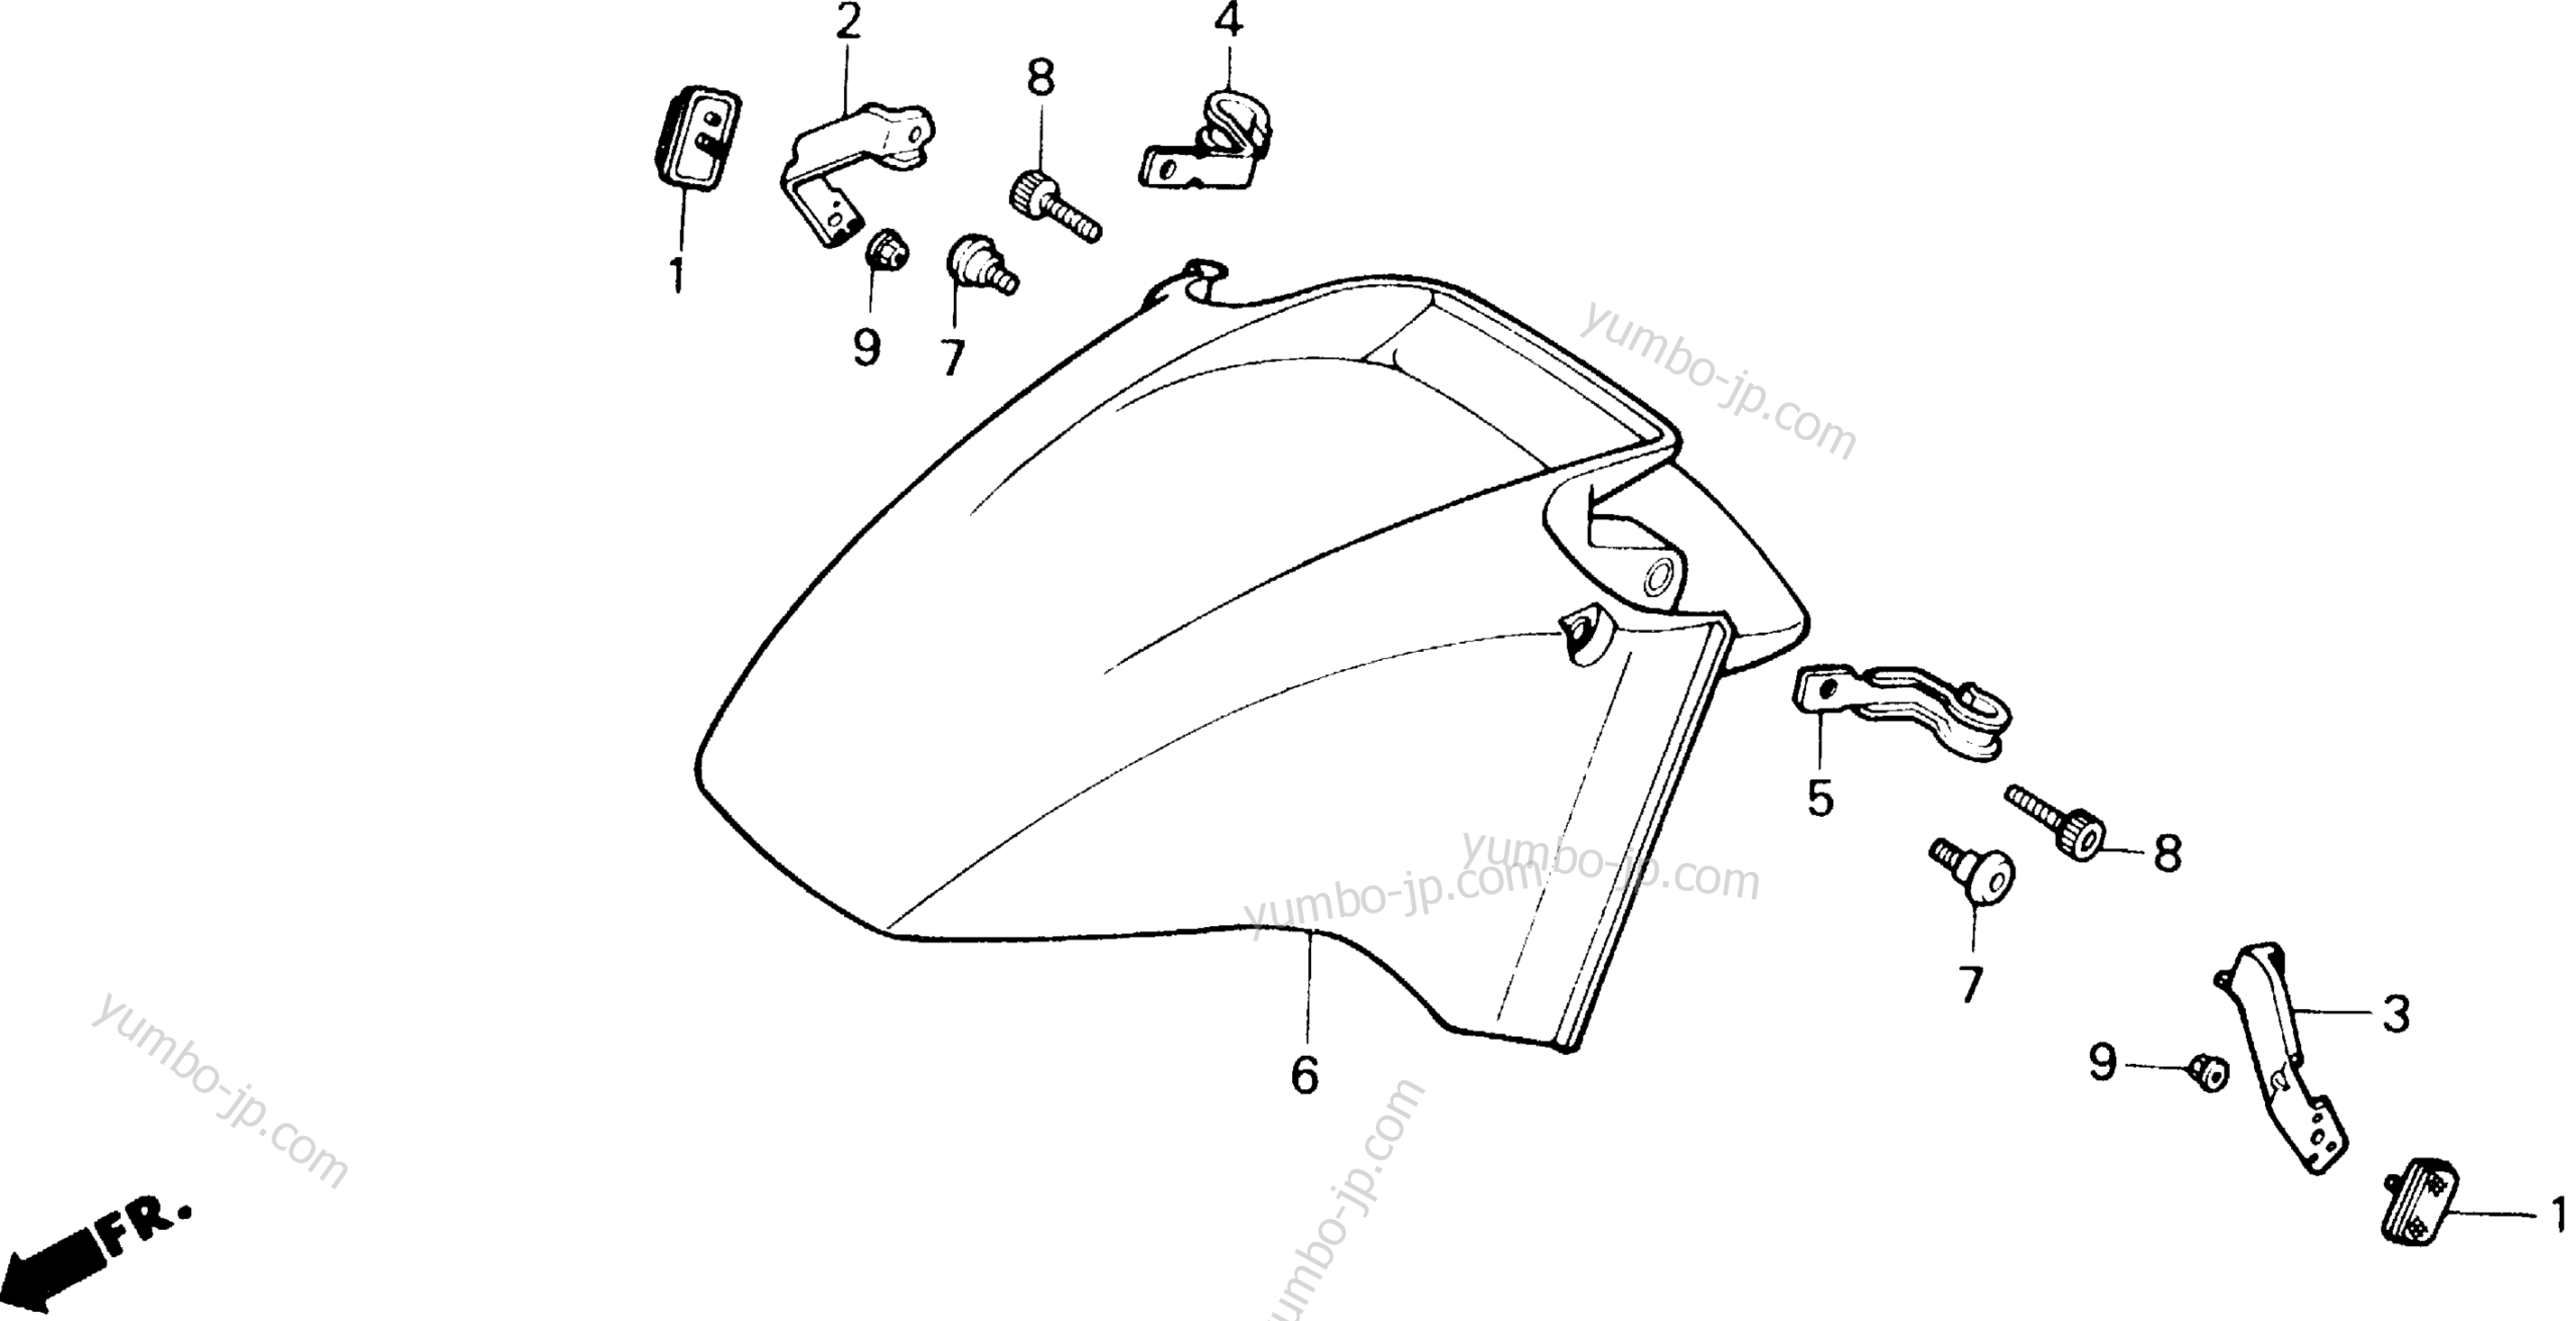 FRONT FENDER for motorcycles HONDA VFR700F2 A 1987 year